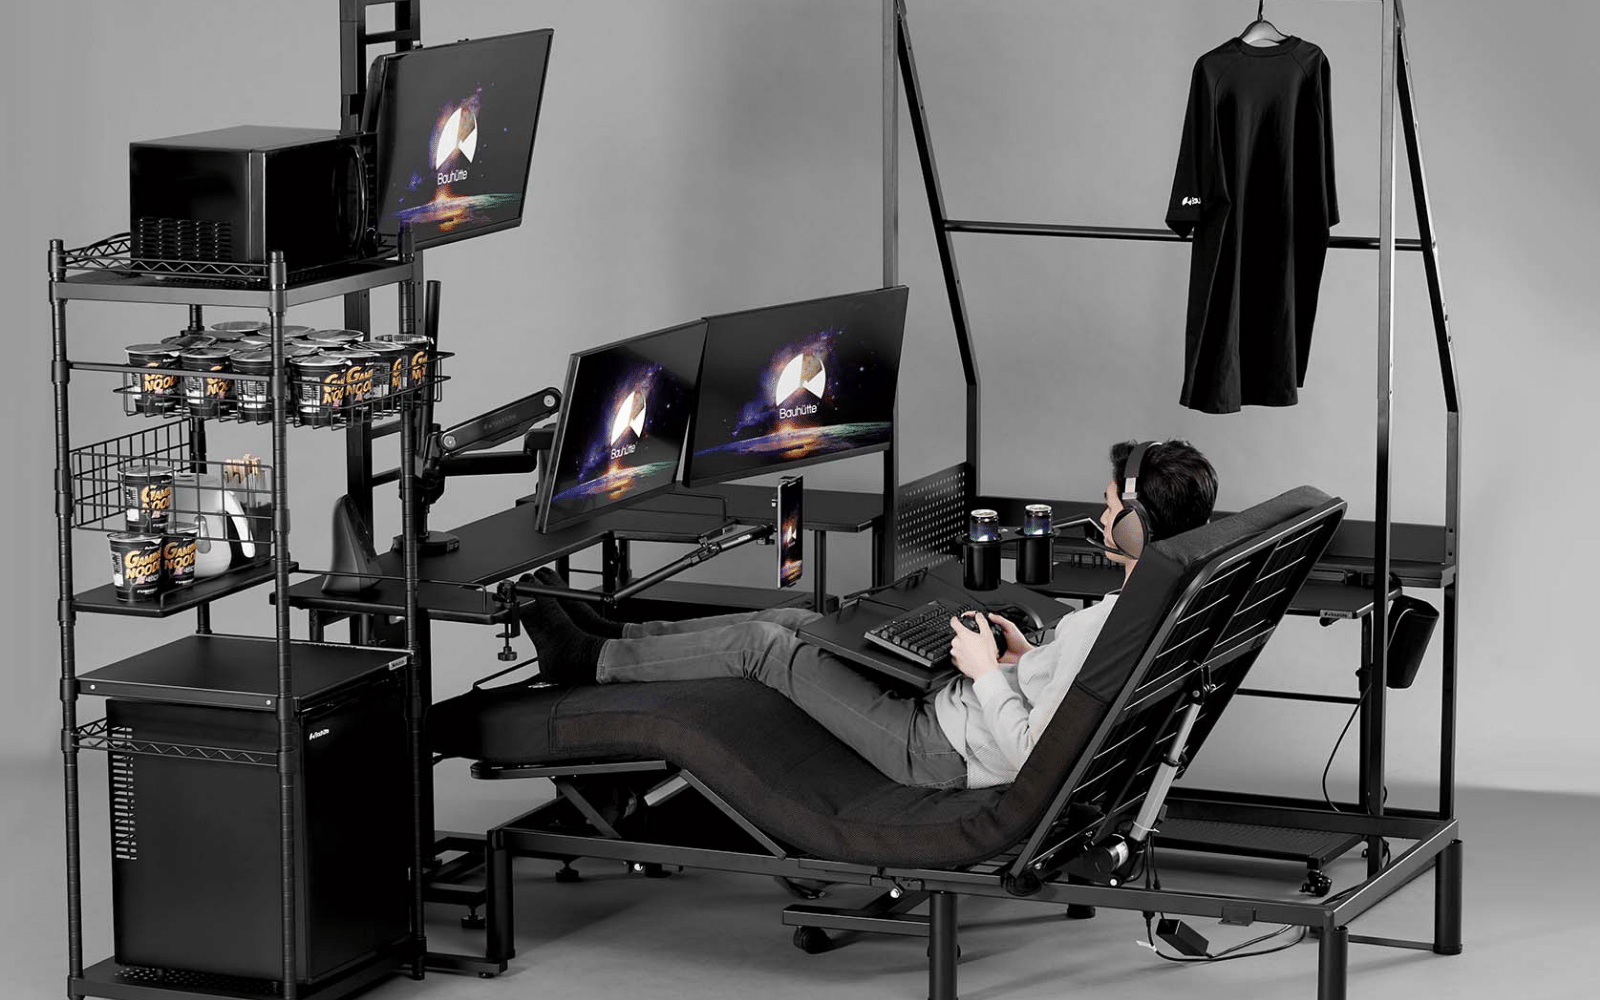 Bauhutte's Latest Gaming Desk/bed Is Just The Thing For Lying